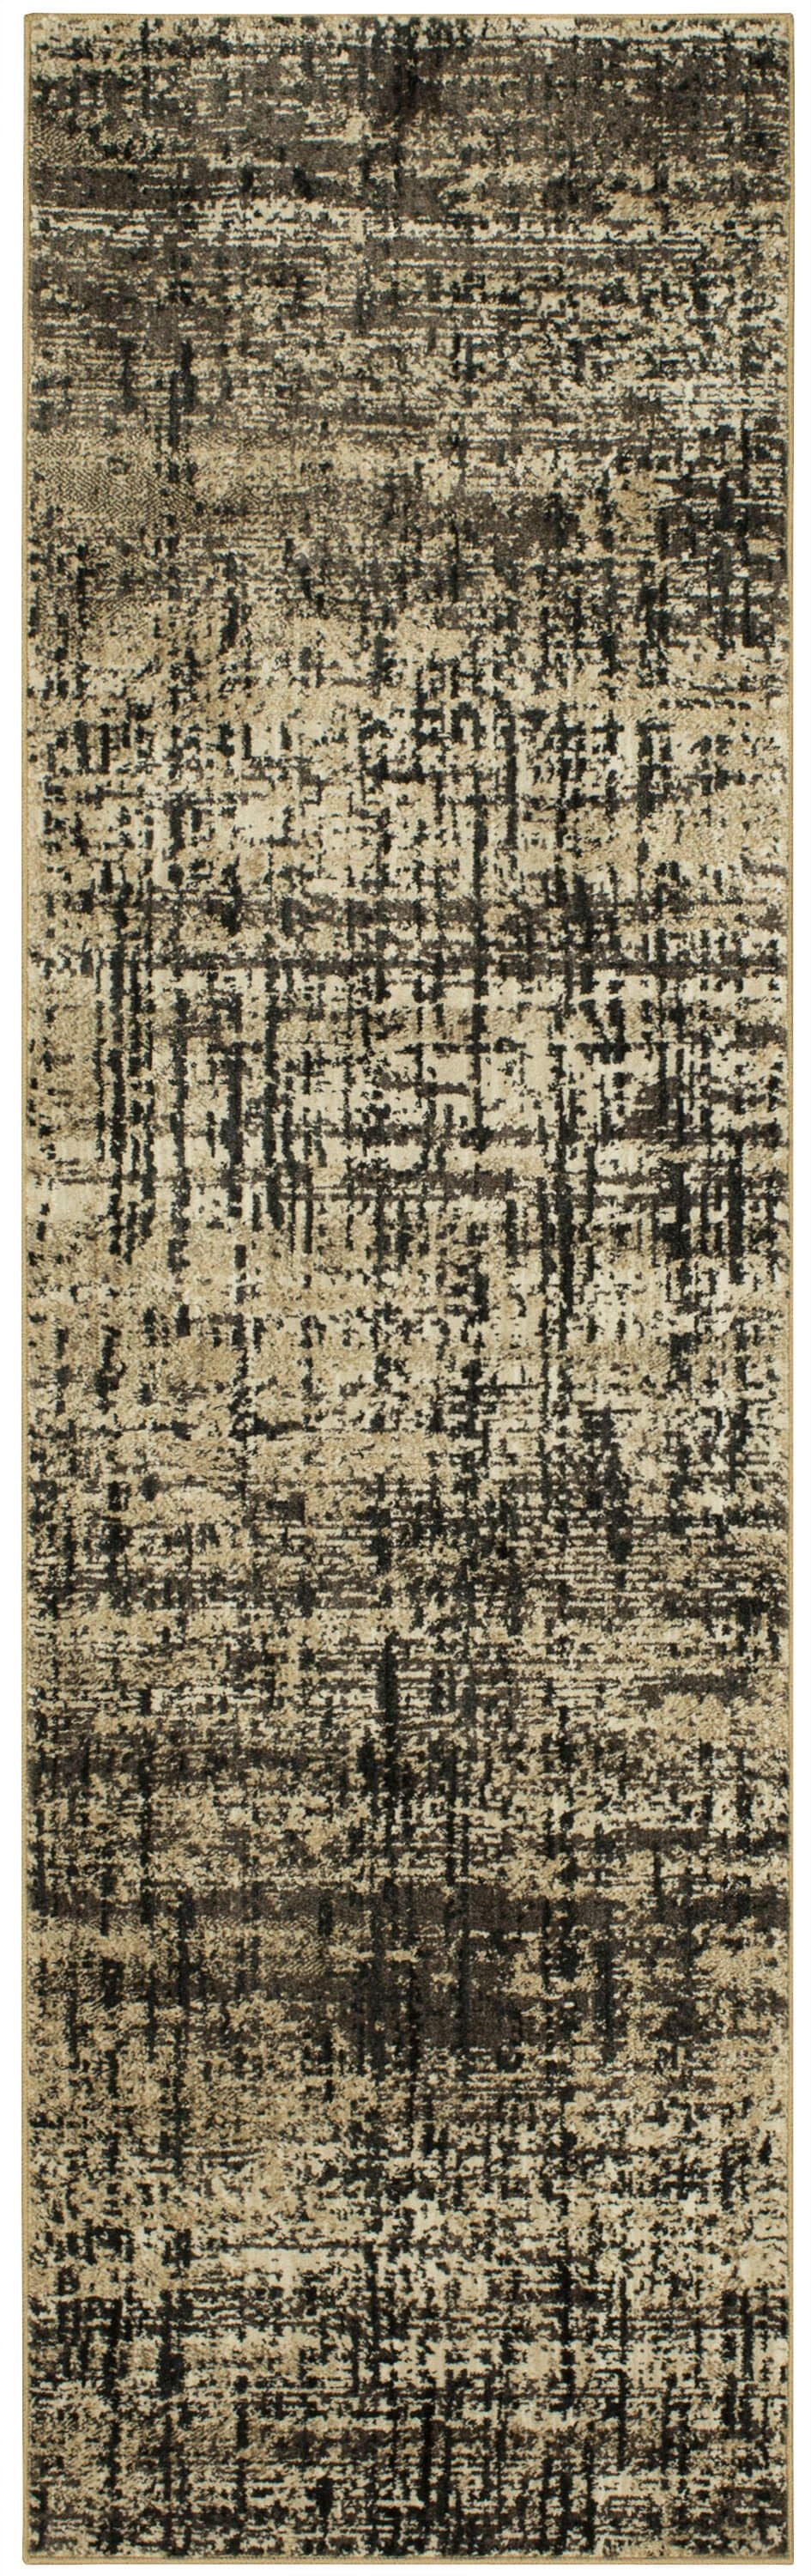 Scott Living Expressions by Scott Living 91826 Onyx  Modern/Contemporary Machinemade Rug